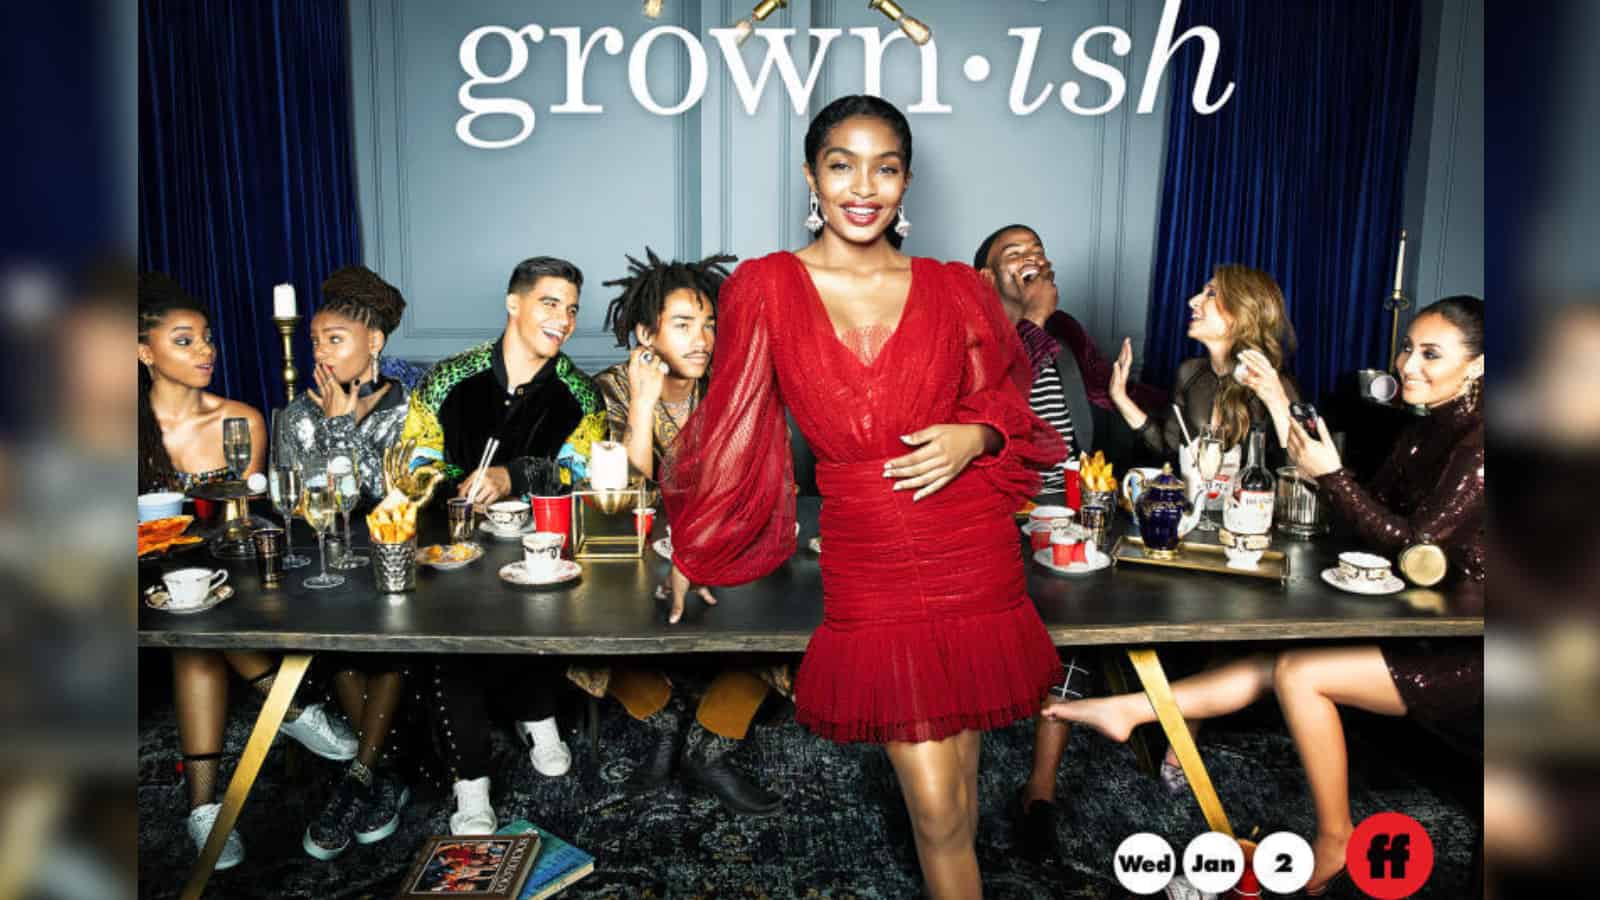 Grown ish update: season 3 release date, cast, plot and other details